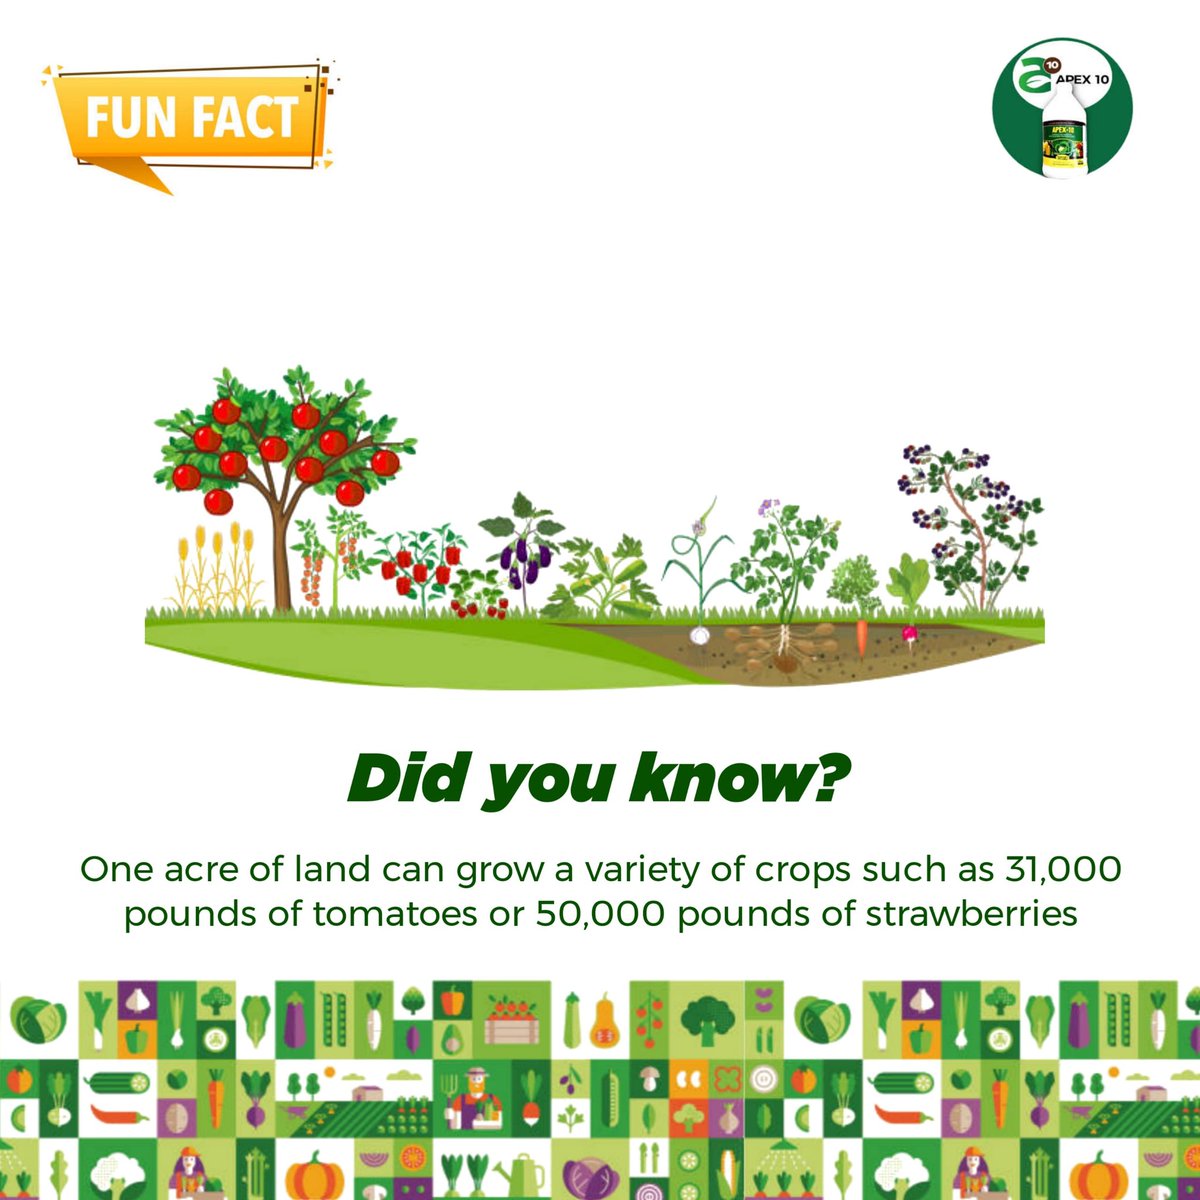 Did you know that just one acre can produce 15,000 pounds of corn, 31,000 pounds of tomatoes or 50,000 pounds of strawberries? 

Now you know what to do with the land you inherited from your forefathers 🌝😂
#agriculture #agribusiness #DidYouKnow #TGIF #TodayisFriday